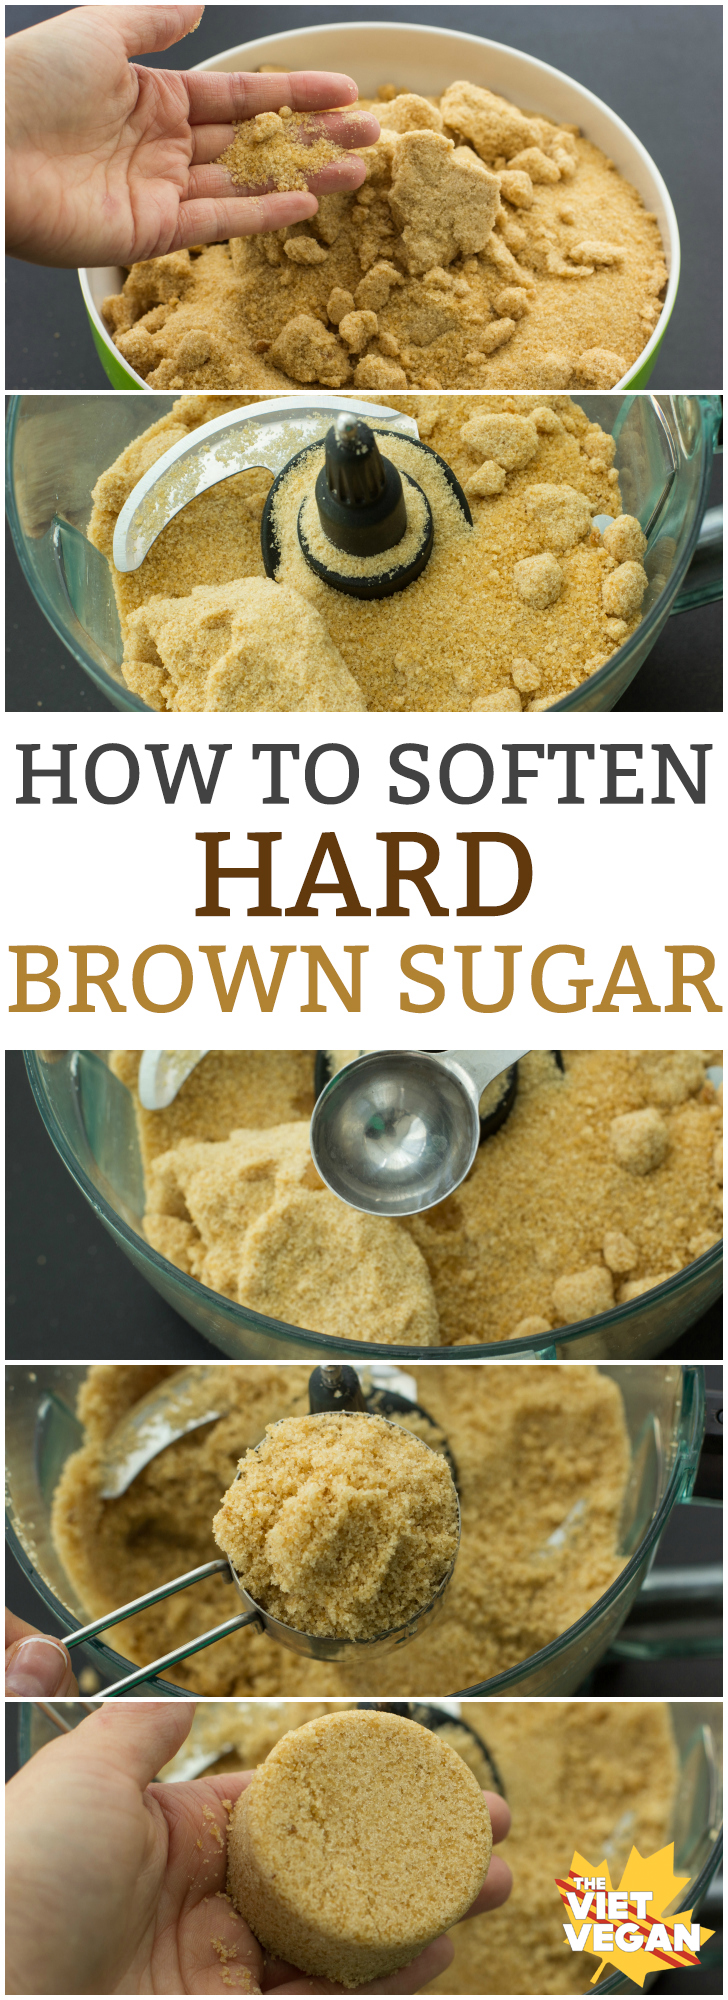 How to Soften Hard Brown Sugar | The Viet Vegan | All you need is 5 minutes and a food processor!